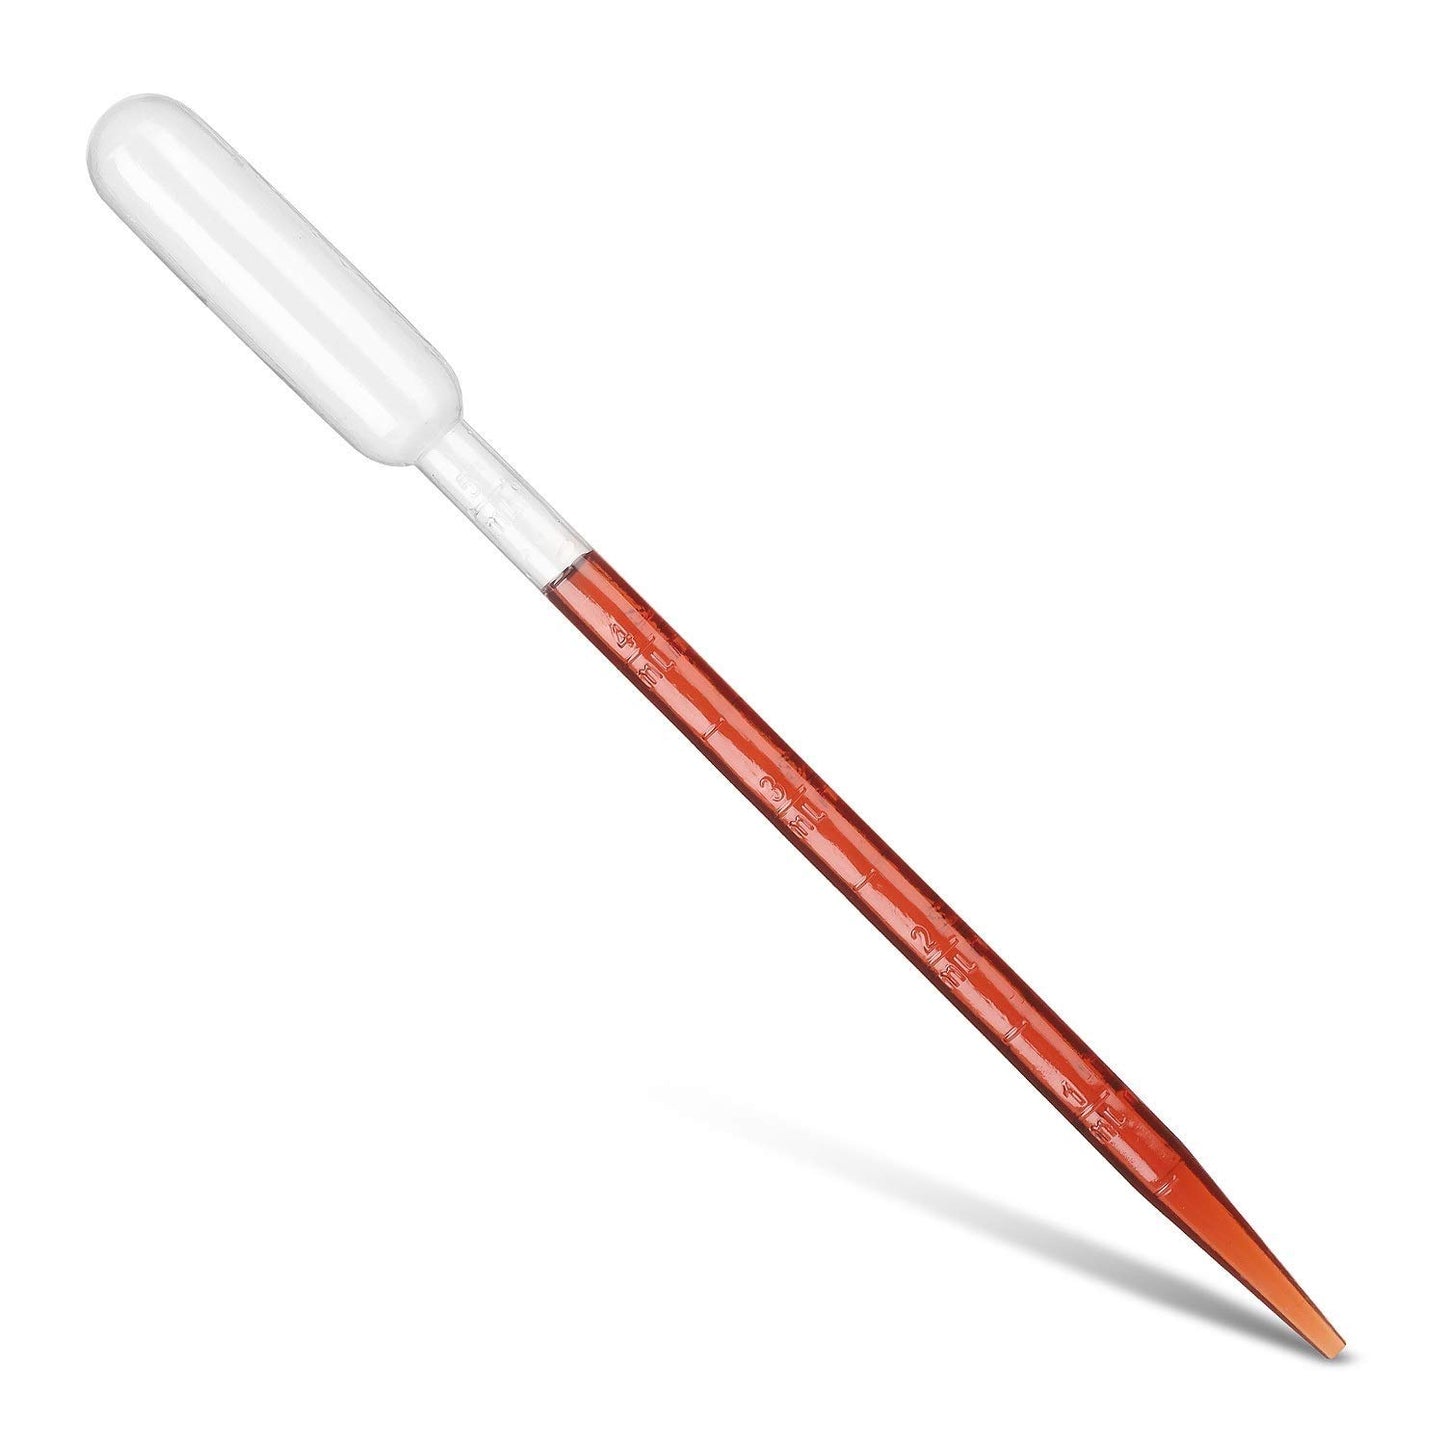 3 ml Disposable Transfer Pipettes with Graduations